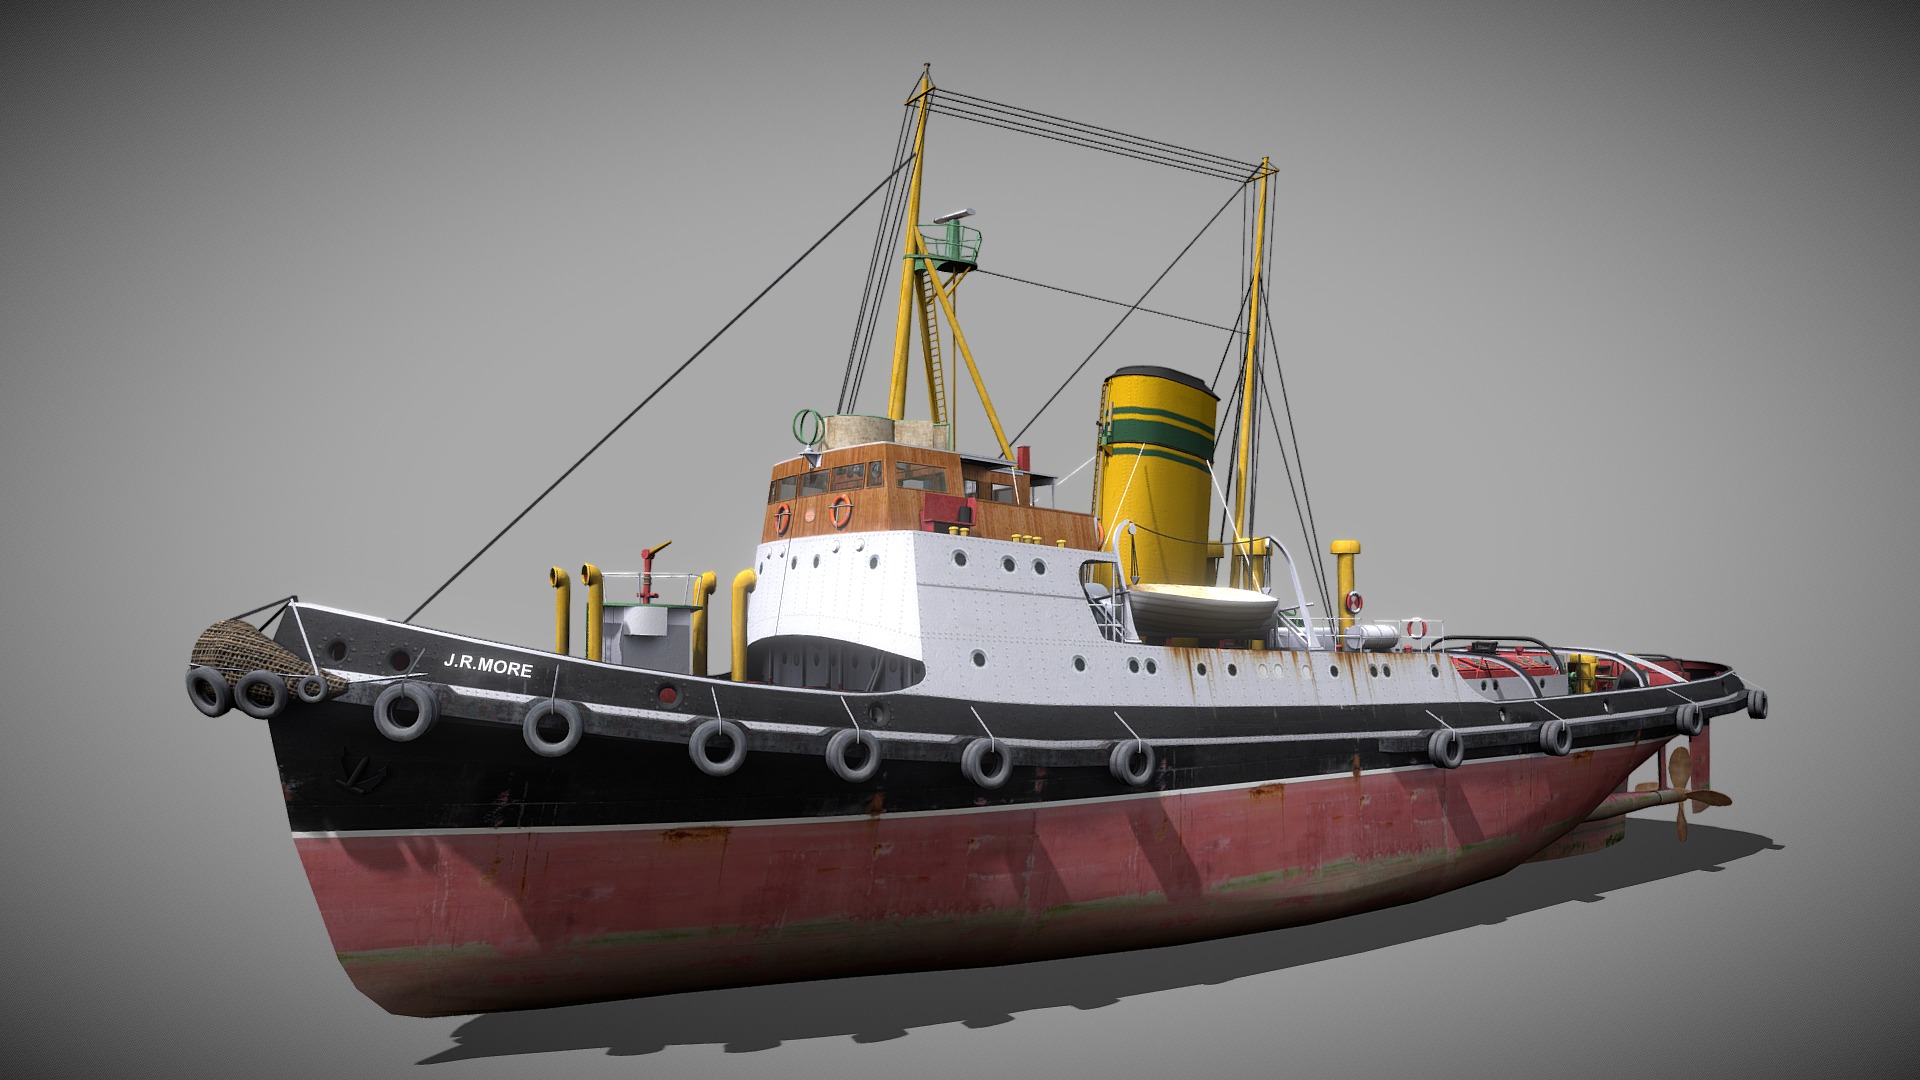 3D model J.R. More Tug (1961) - This is a 3D model of the J.R. More Tug (1961). The 3D model is about a large ship in the water.